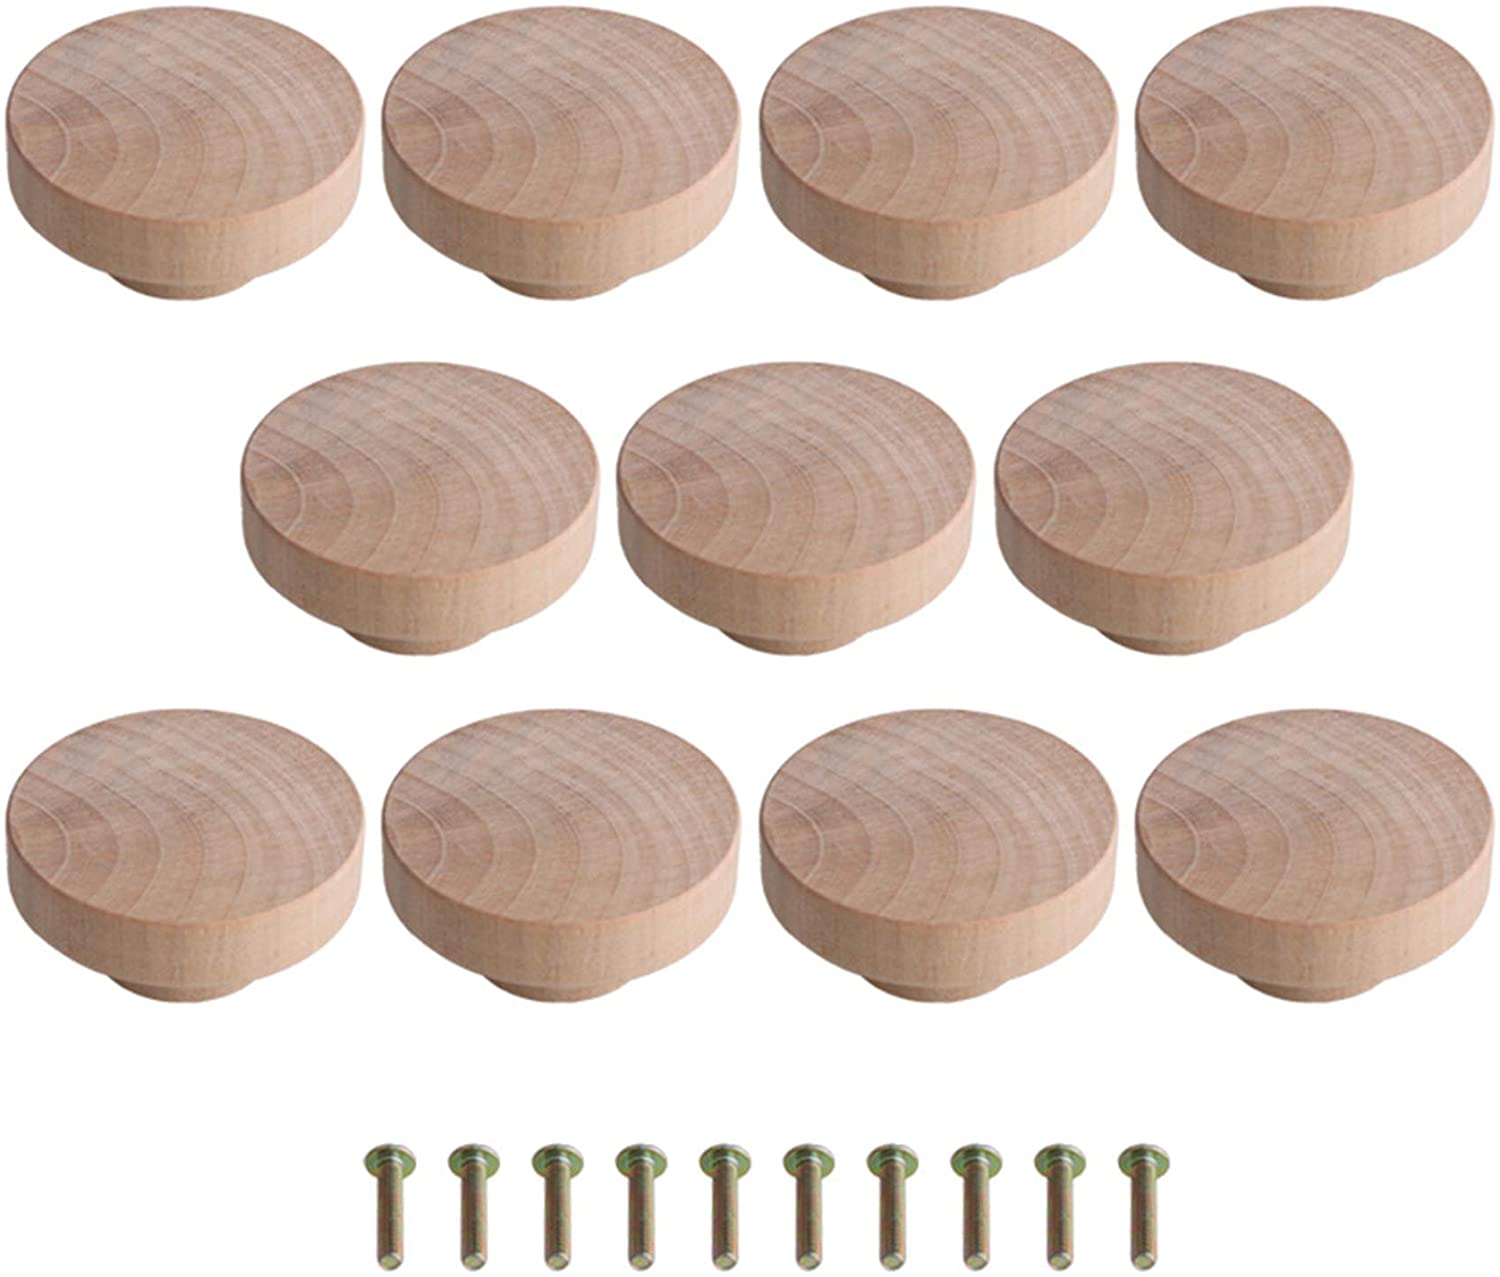 10PCS Round Unfinished Wood Drawer Knobs Pulls Handles - e4cents